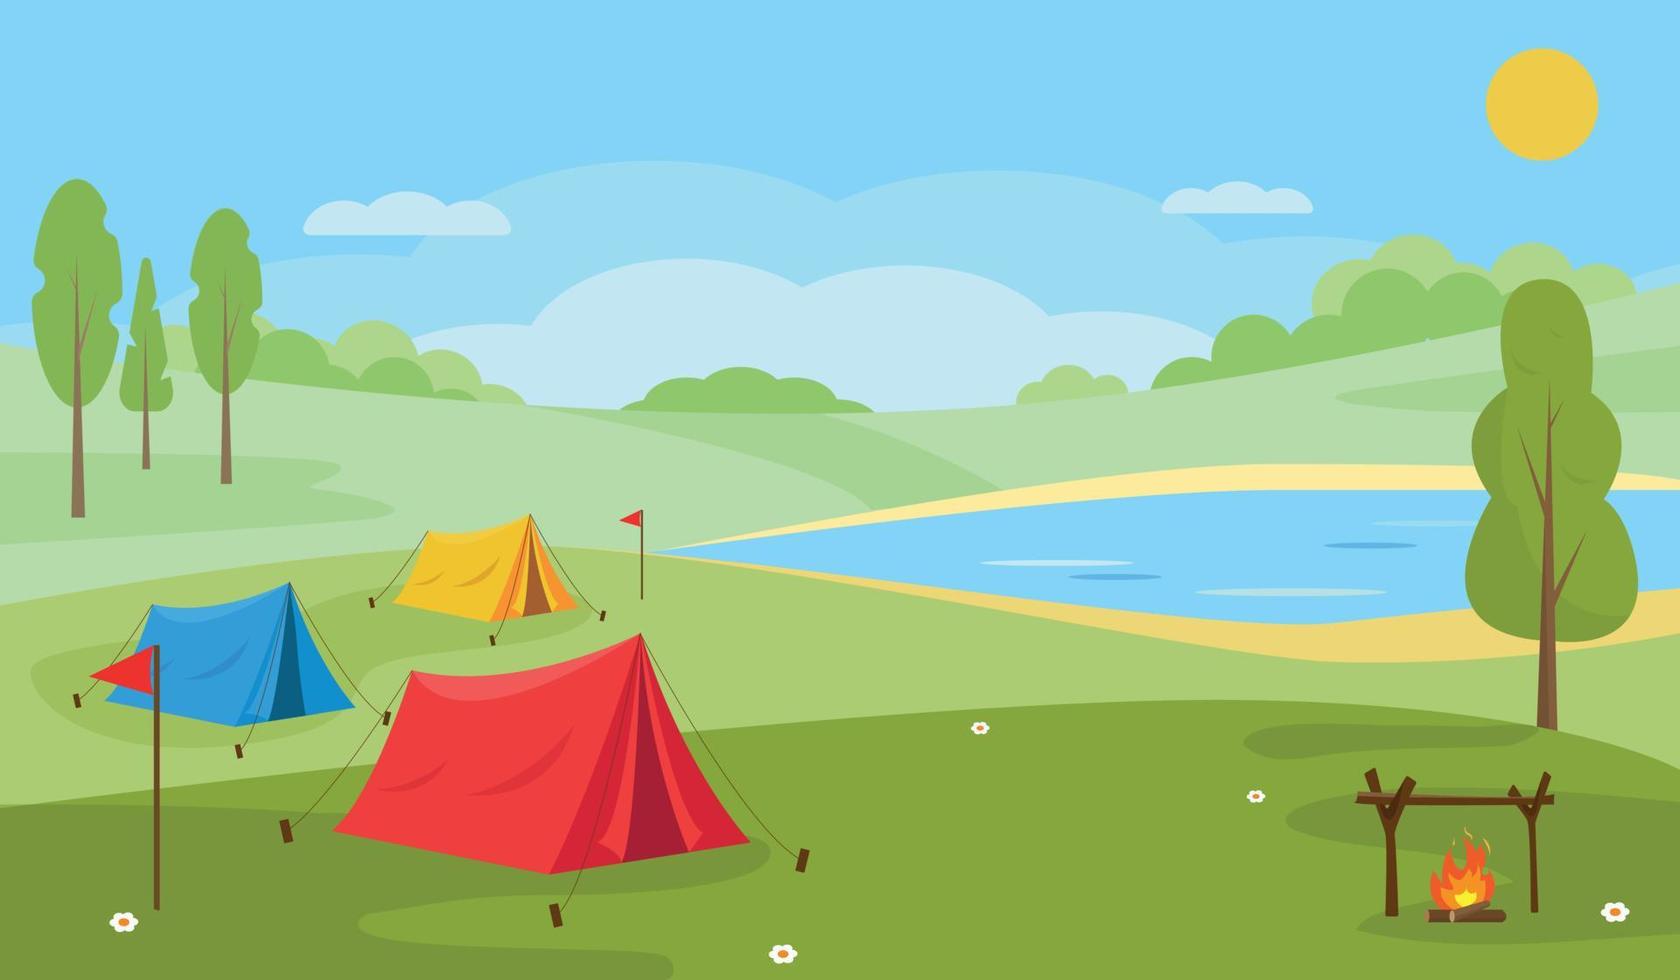 Summer Camping landscape. Countryside nature. Lake or river, trees, camping tents and bonfire. Travel, expedition, explore concept. Vector illustration.